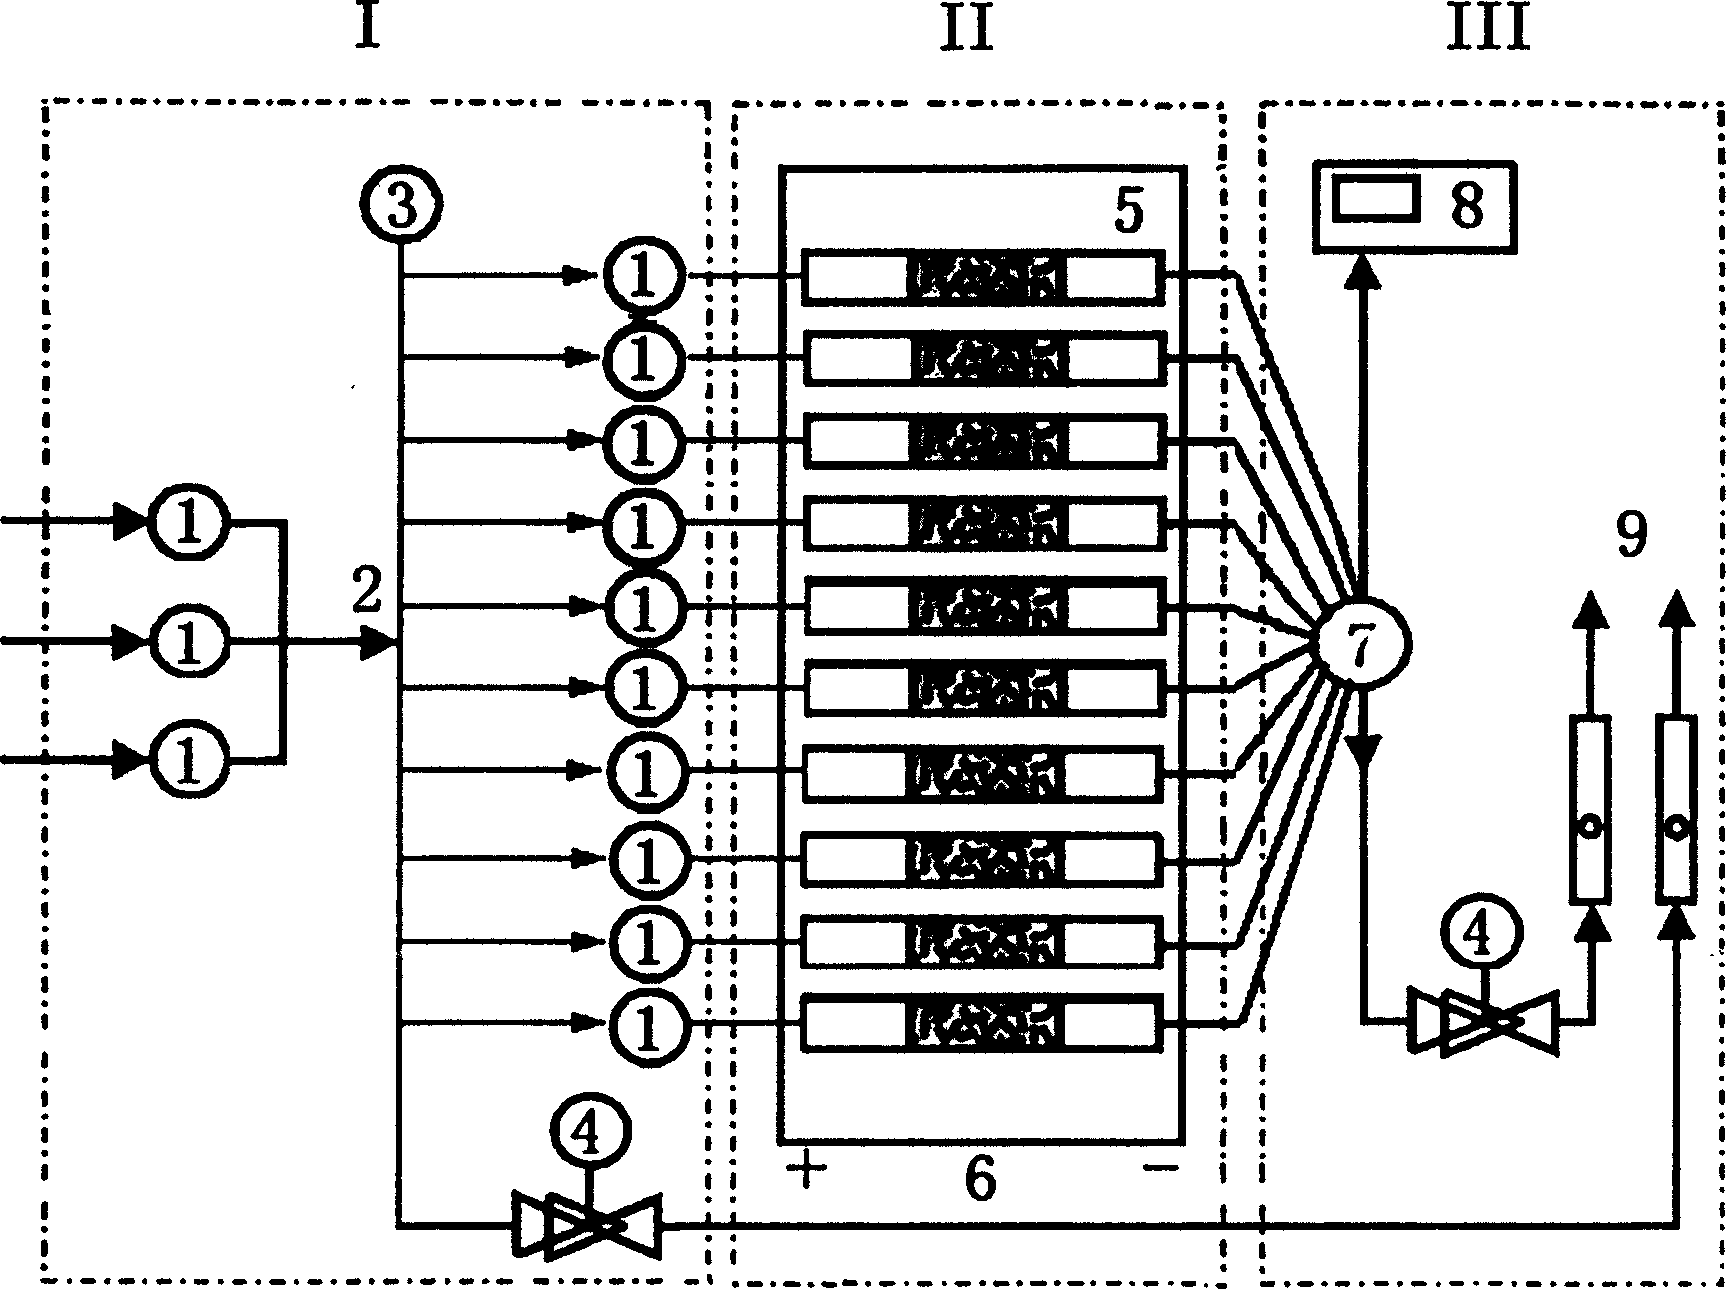 Multichannel fixed bed reacter and reaction method